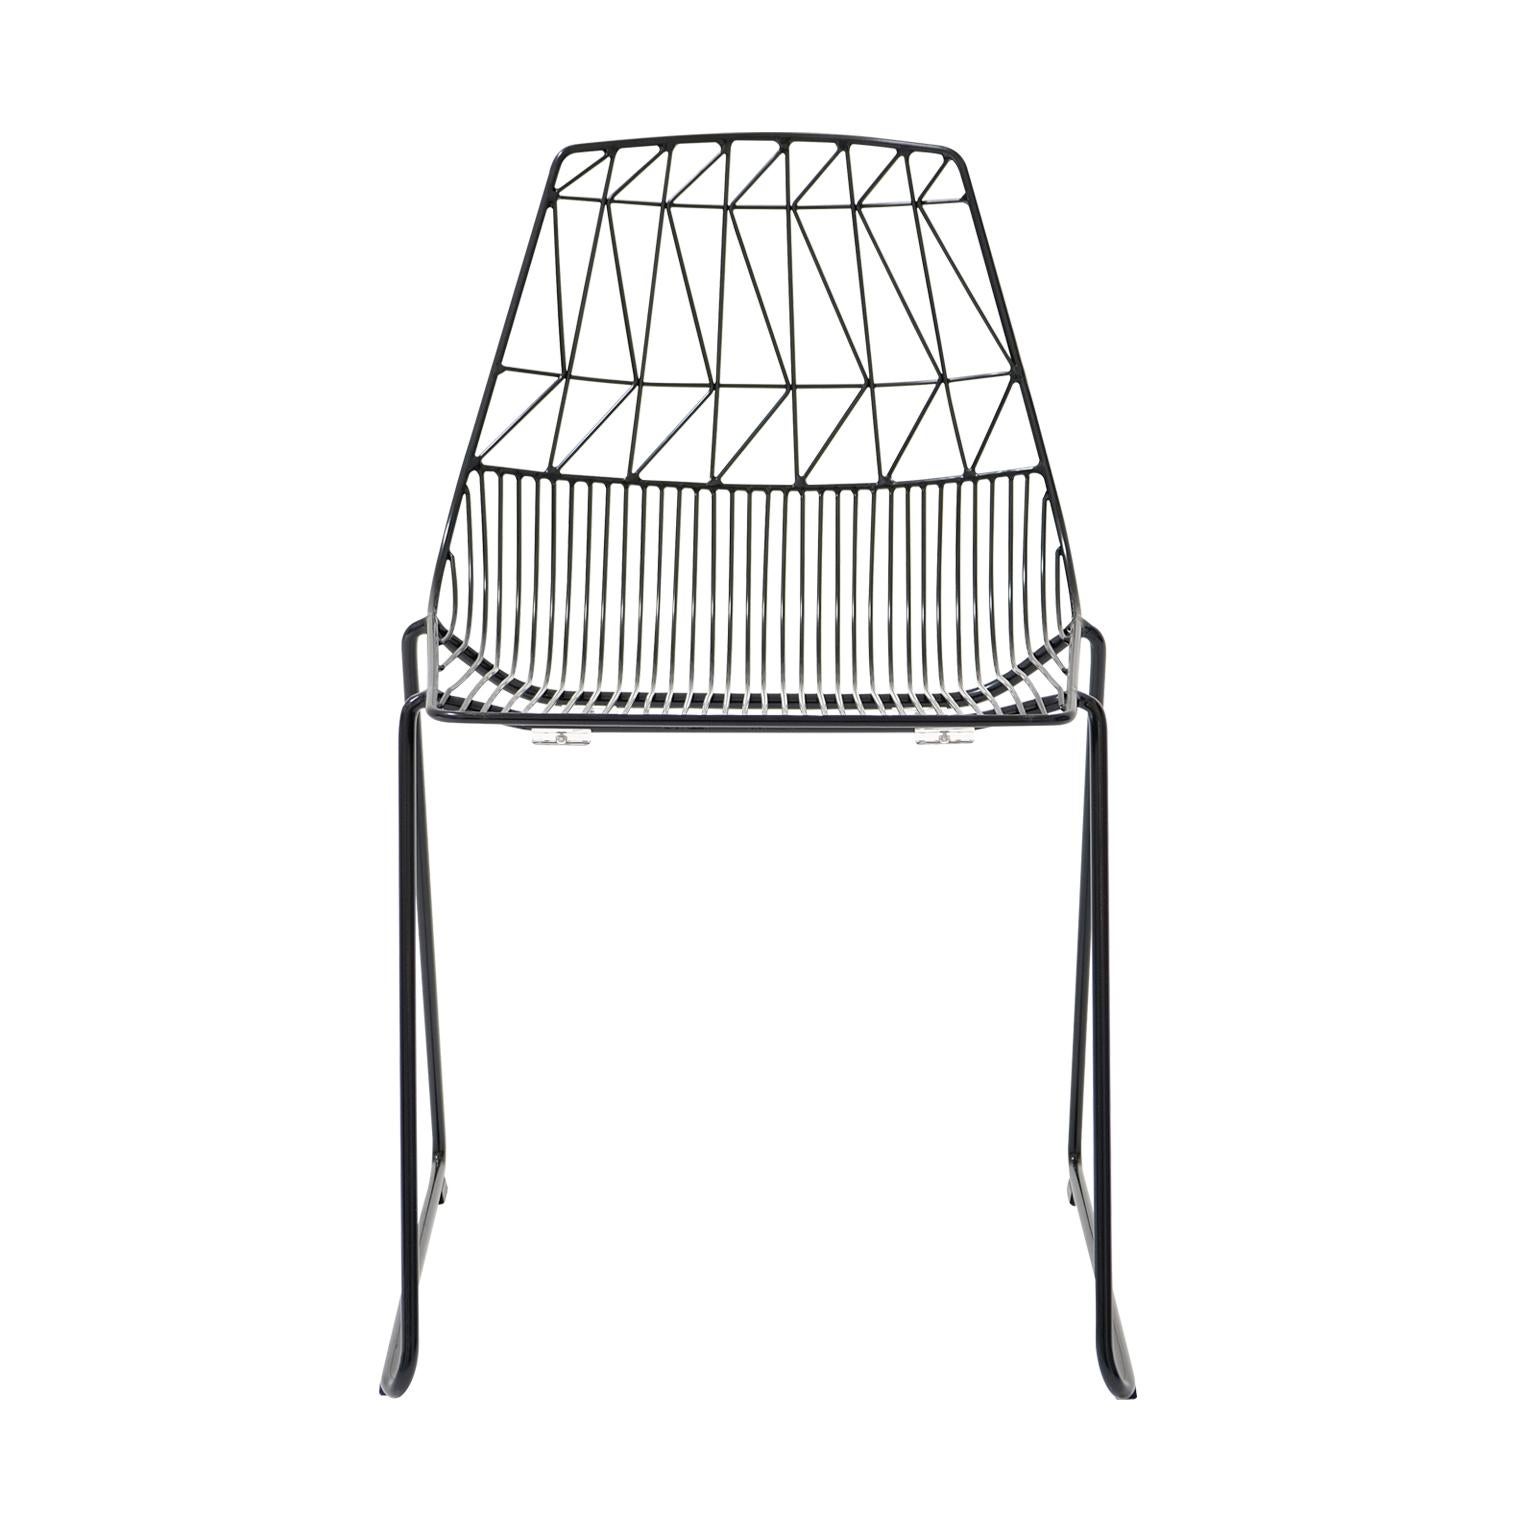 Bend Goods Wire Furniture
A classic wire dining chair, The Stacking Lucy chair combines versatility with Mid-Century Modern wire design. Great for outdoor commercial seating with the ability to stack up to 6 chairs for easy storage. UPS standard